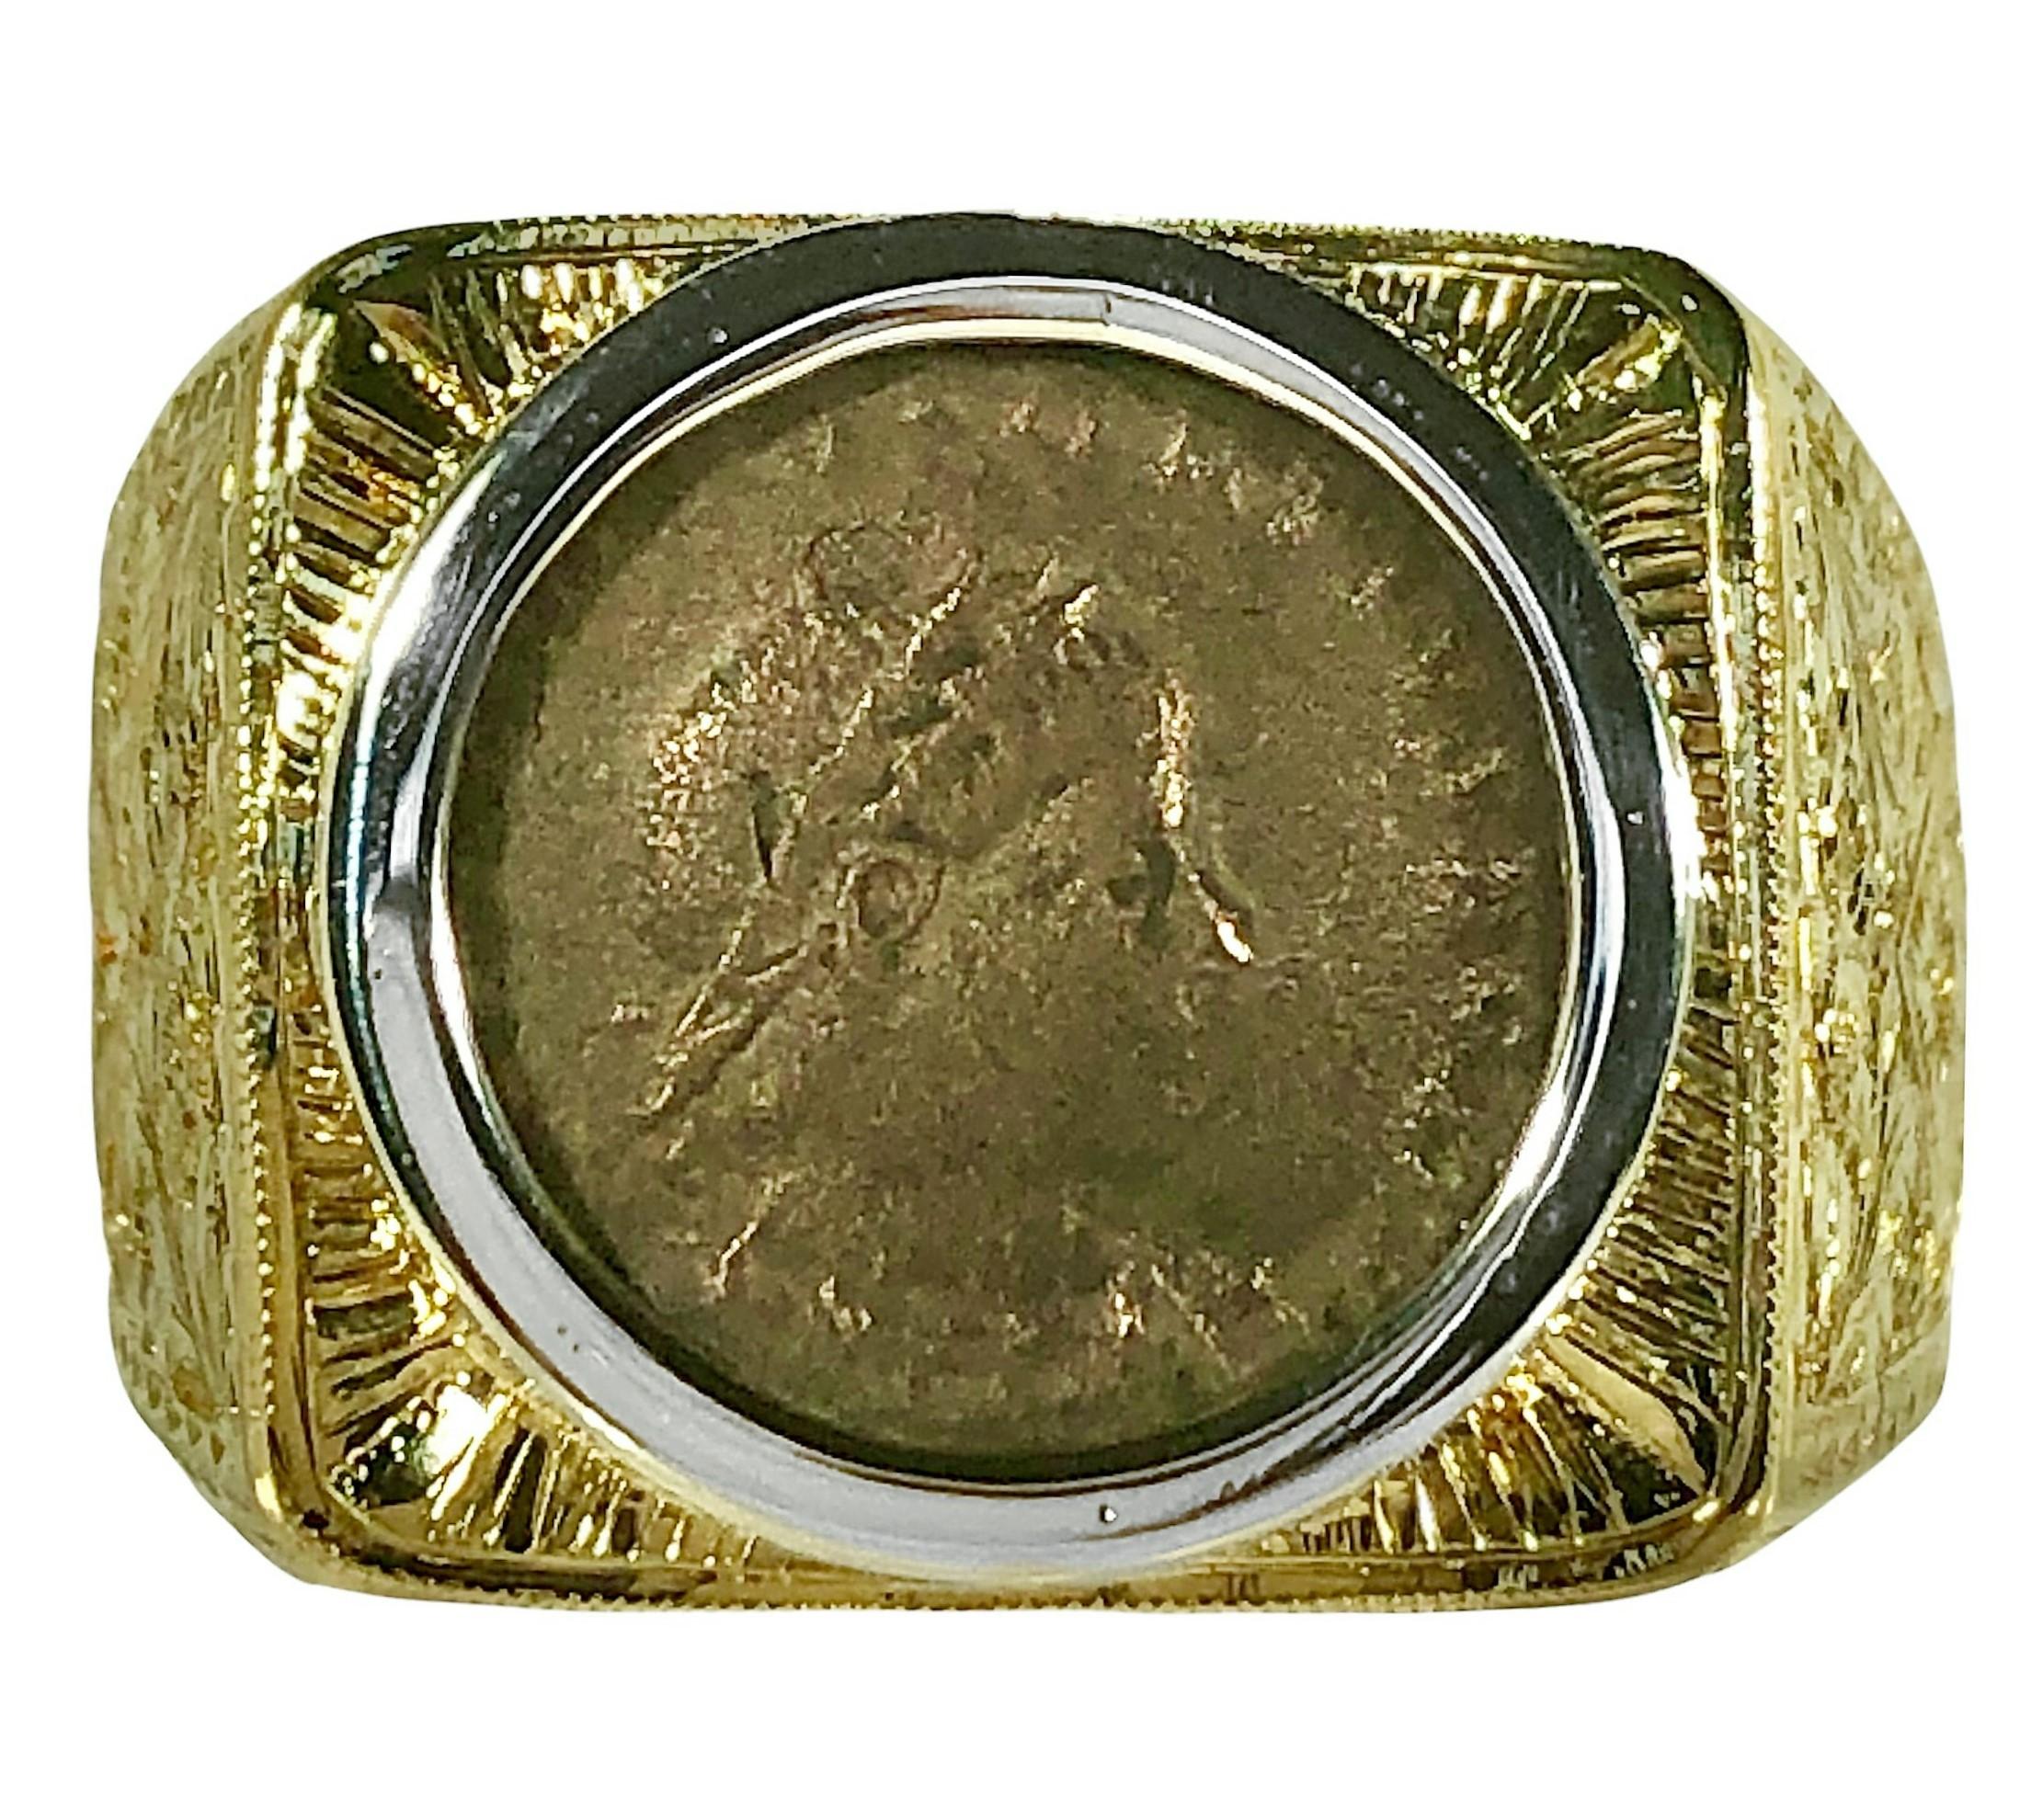 This vintage men's ancient coin ring is unique in that all of the intricately engraved surfaces were crafted entirely by hand. At it's center is an authentic ancient bronze coin set securely in an 18k white gold mill edged bezel. This center piece